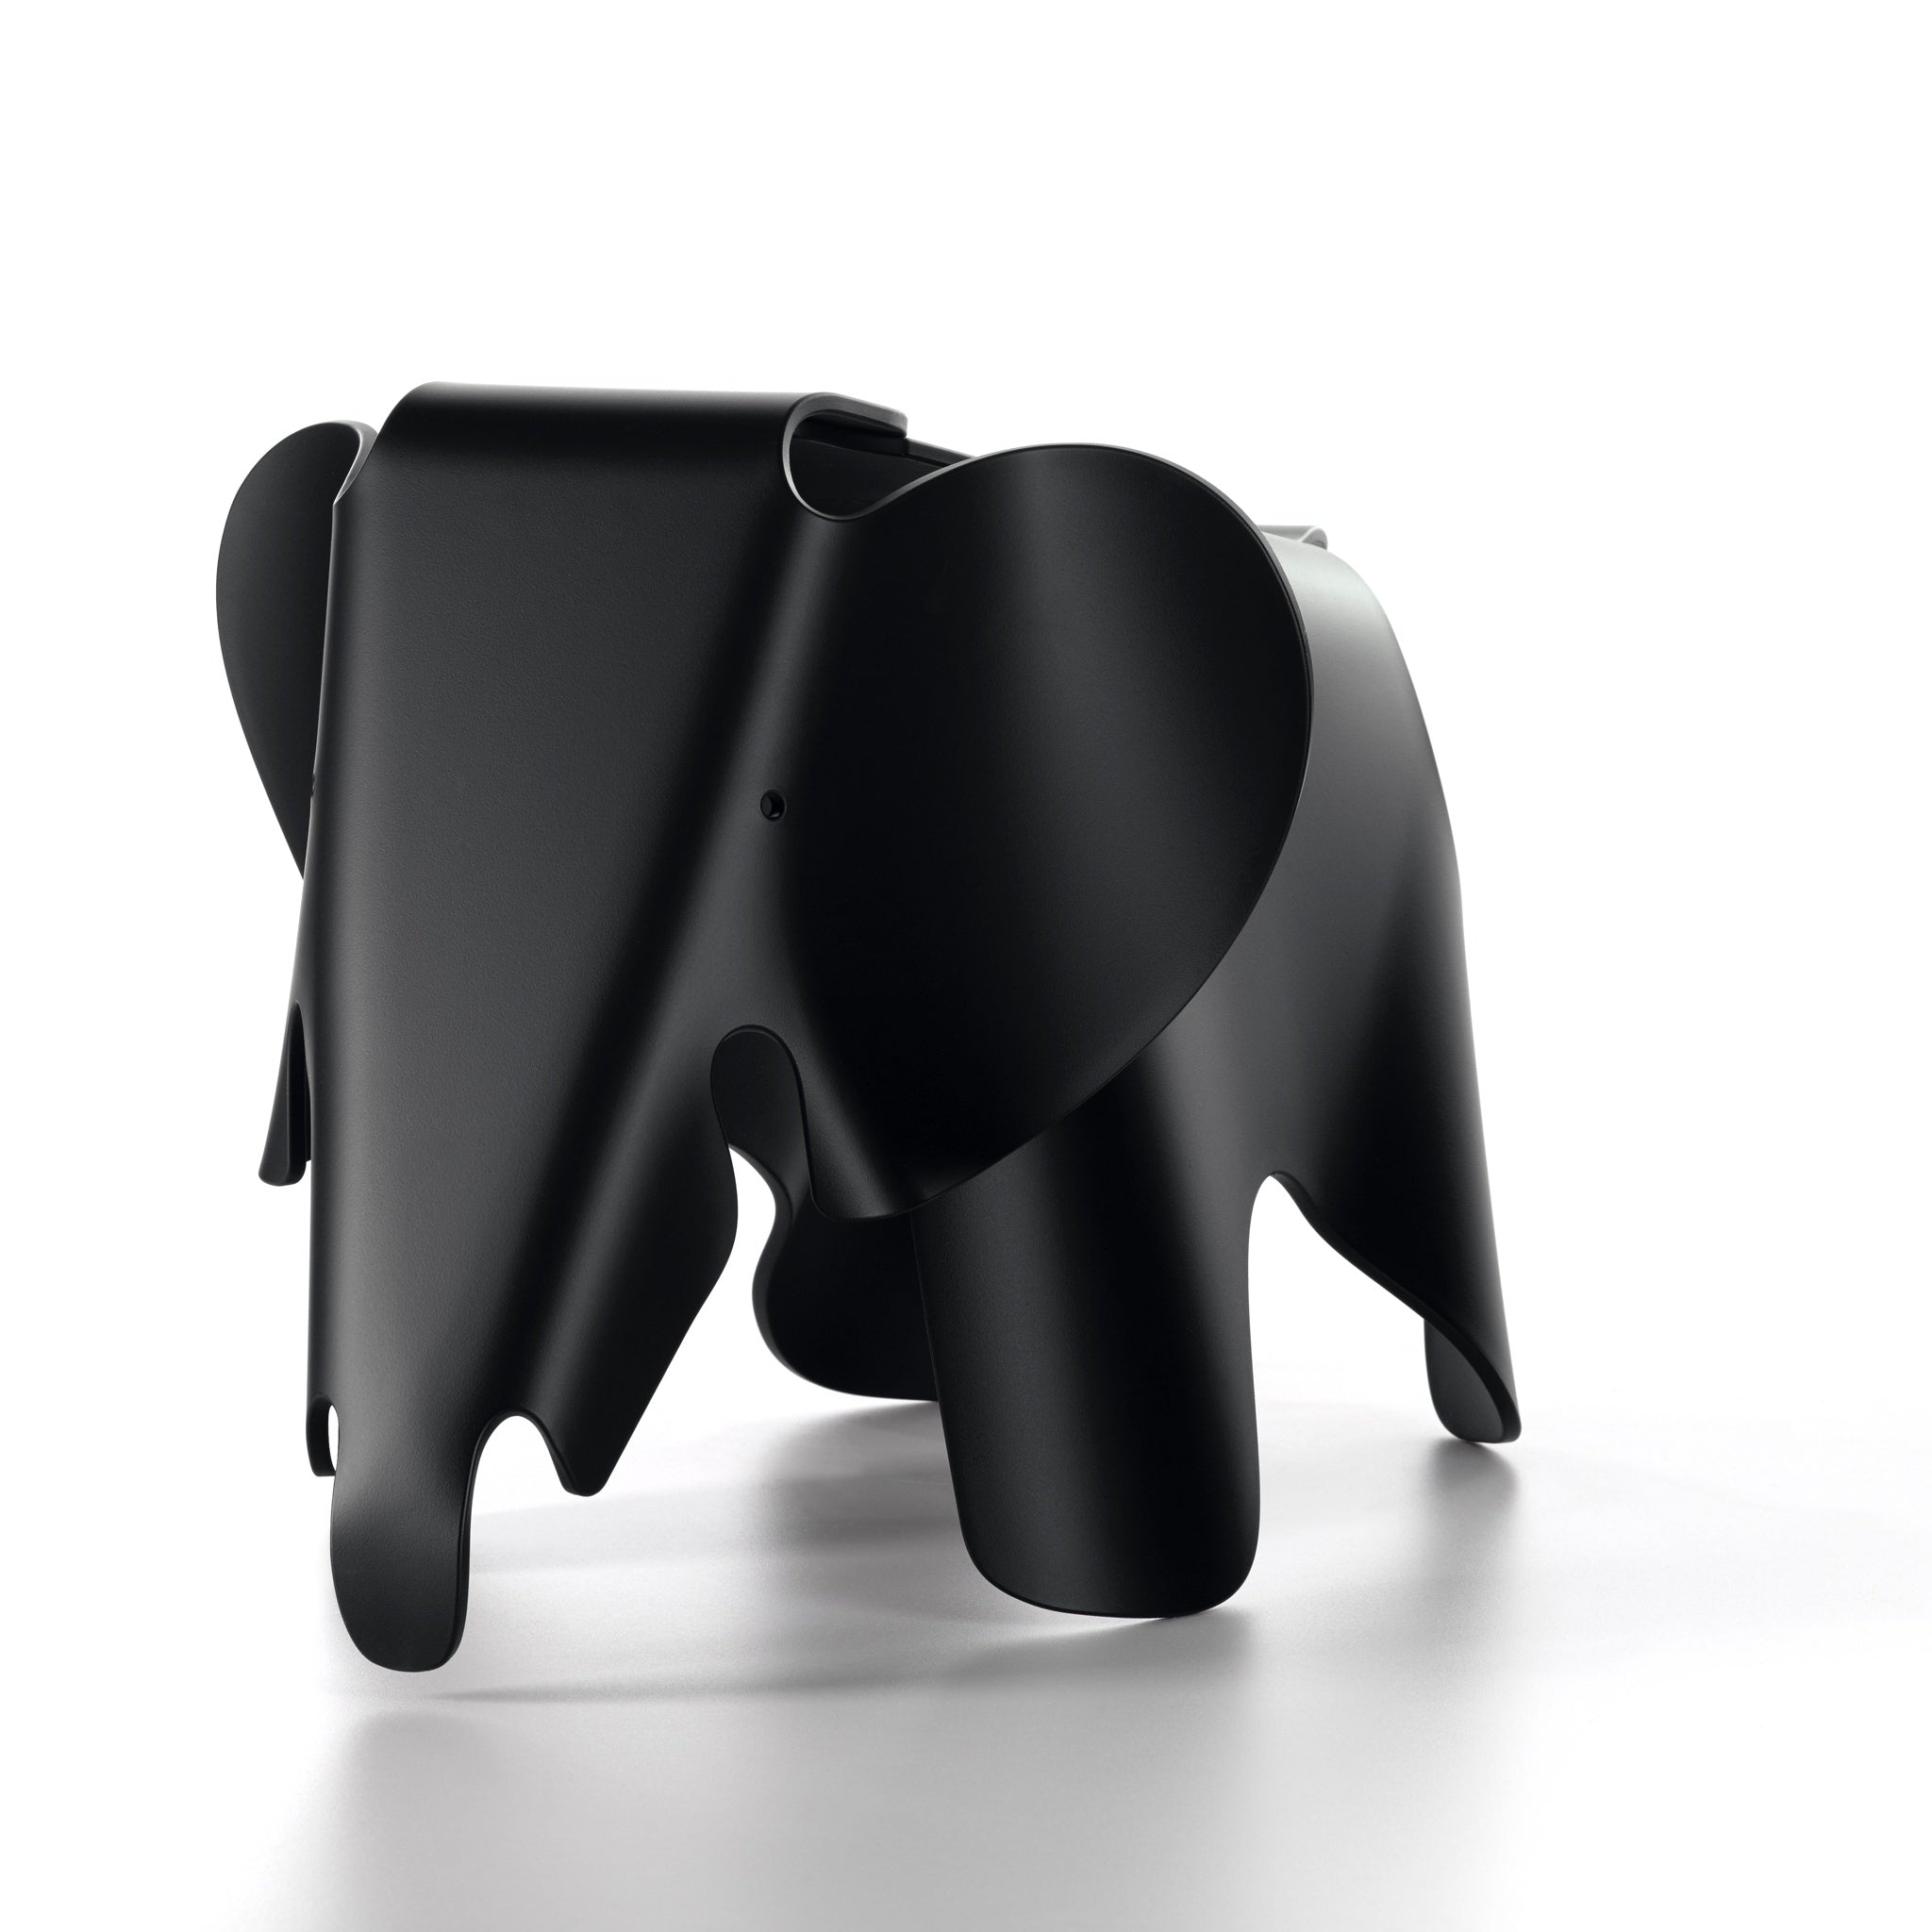 Eames Elephant by Charles and Ray Eames